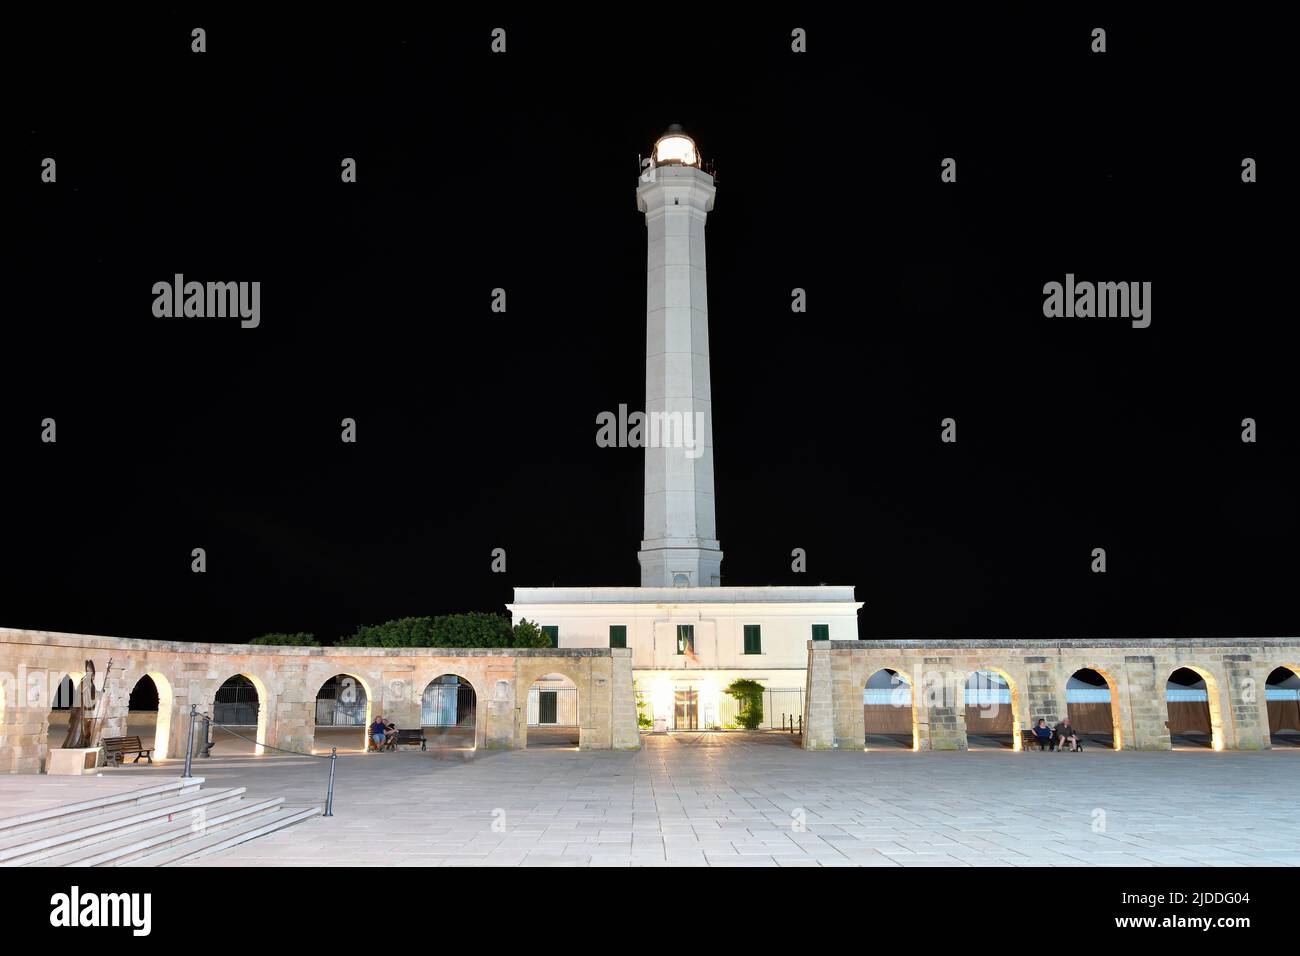 Night view of the lighthouse of Santa Maria di Leuca, a town in southern Italy in the province of Lecce. Stock Photo